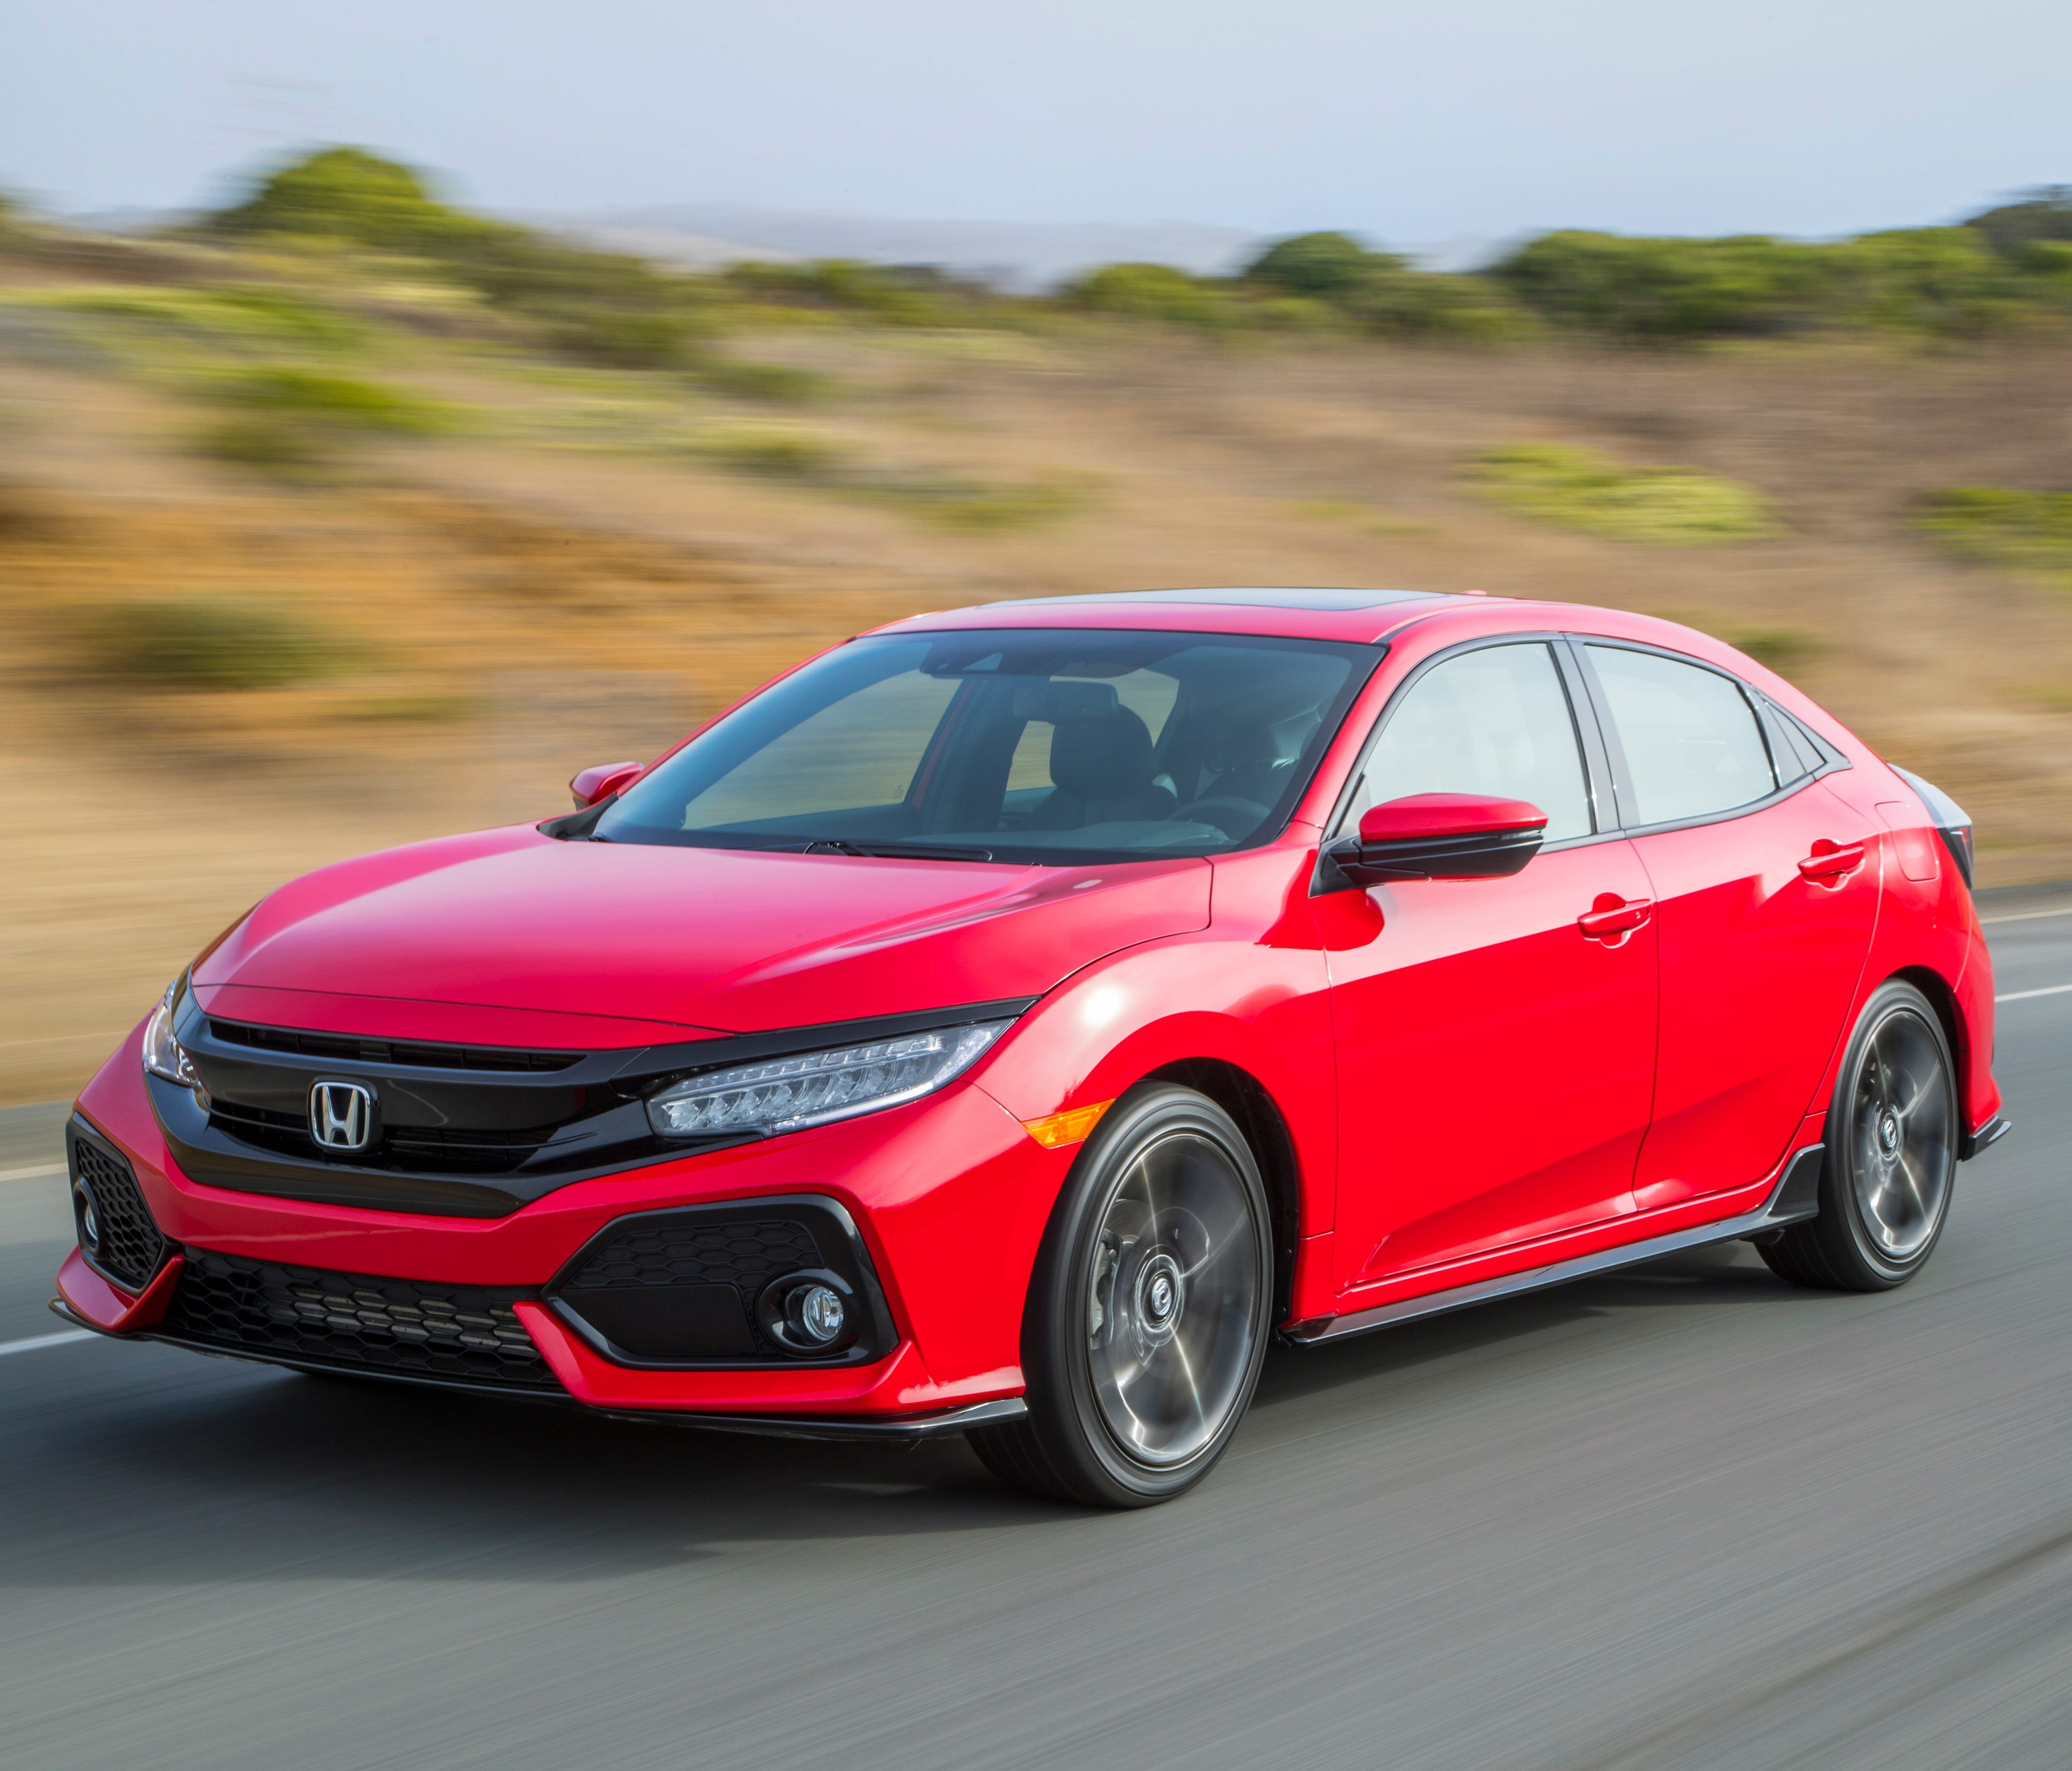 This photo provided by Honda shows the 2018 Honda Civic hatchback, a thoroughly competent compact that re-establishes Honda as a leader in this class, according to Edmunds. Compared to the rival Golf, it offers about 10 percent less cargo space, but 